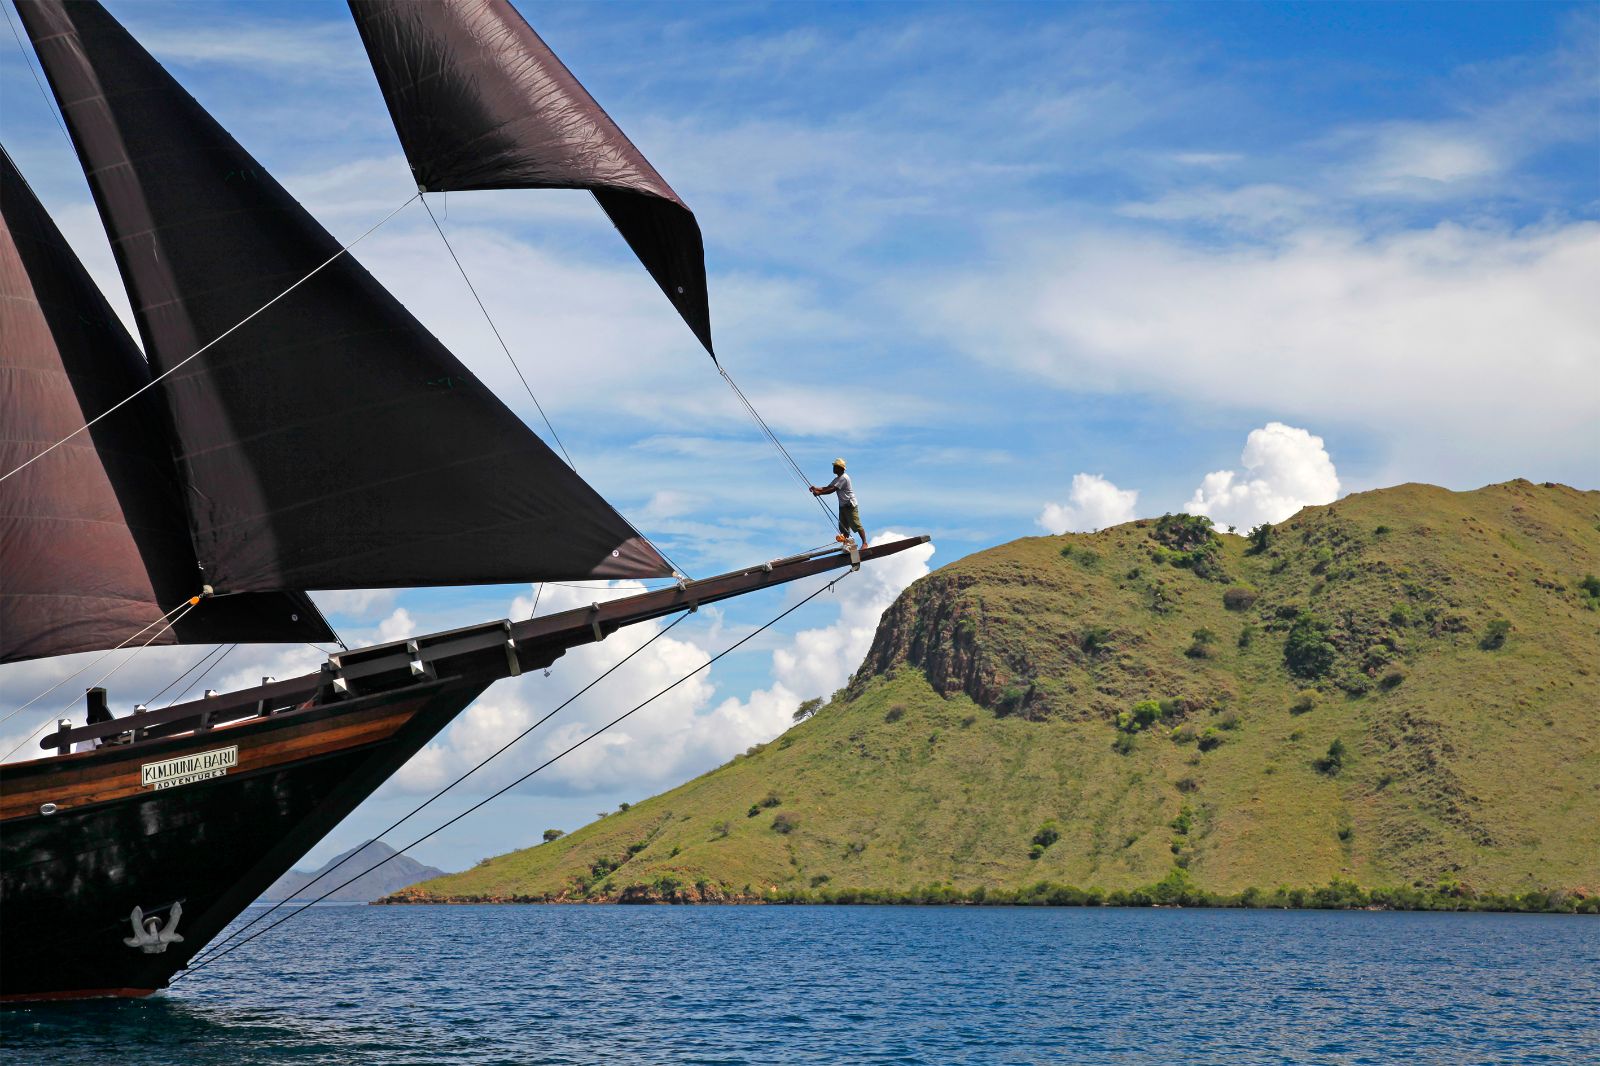 Dunia Baru phinisi on the waters of the Komodo Islands in Indonesia